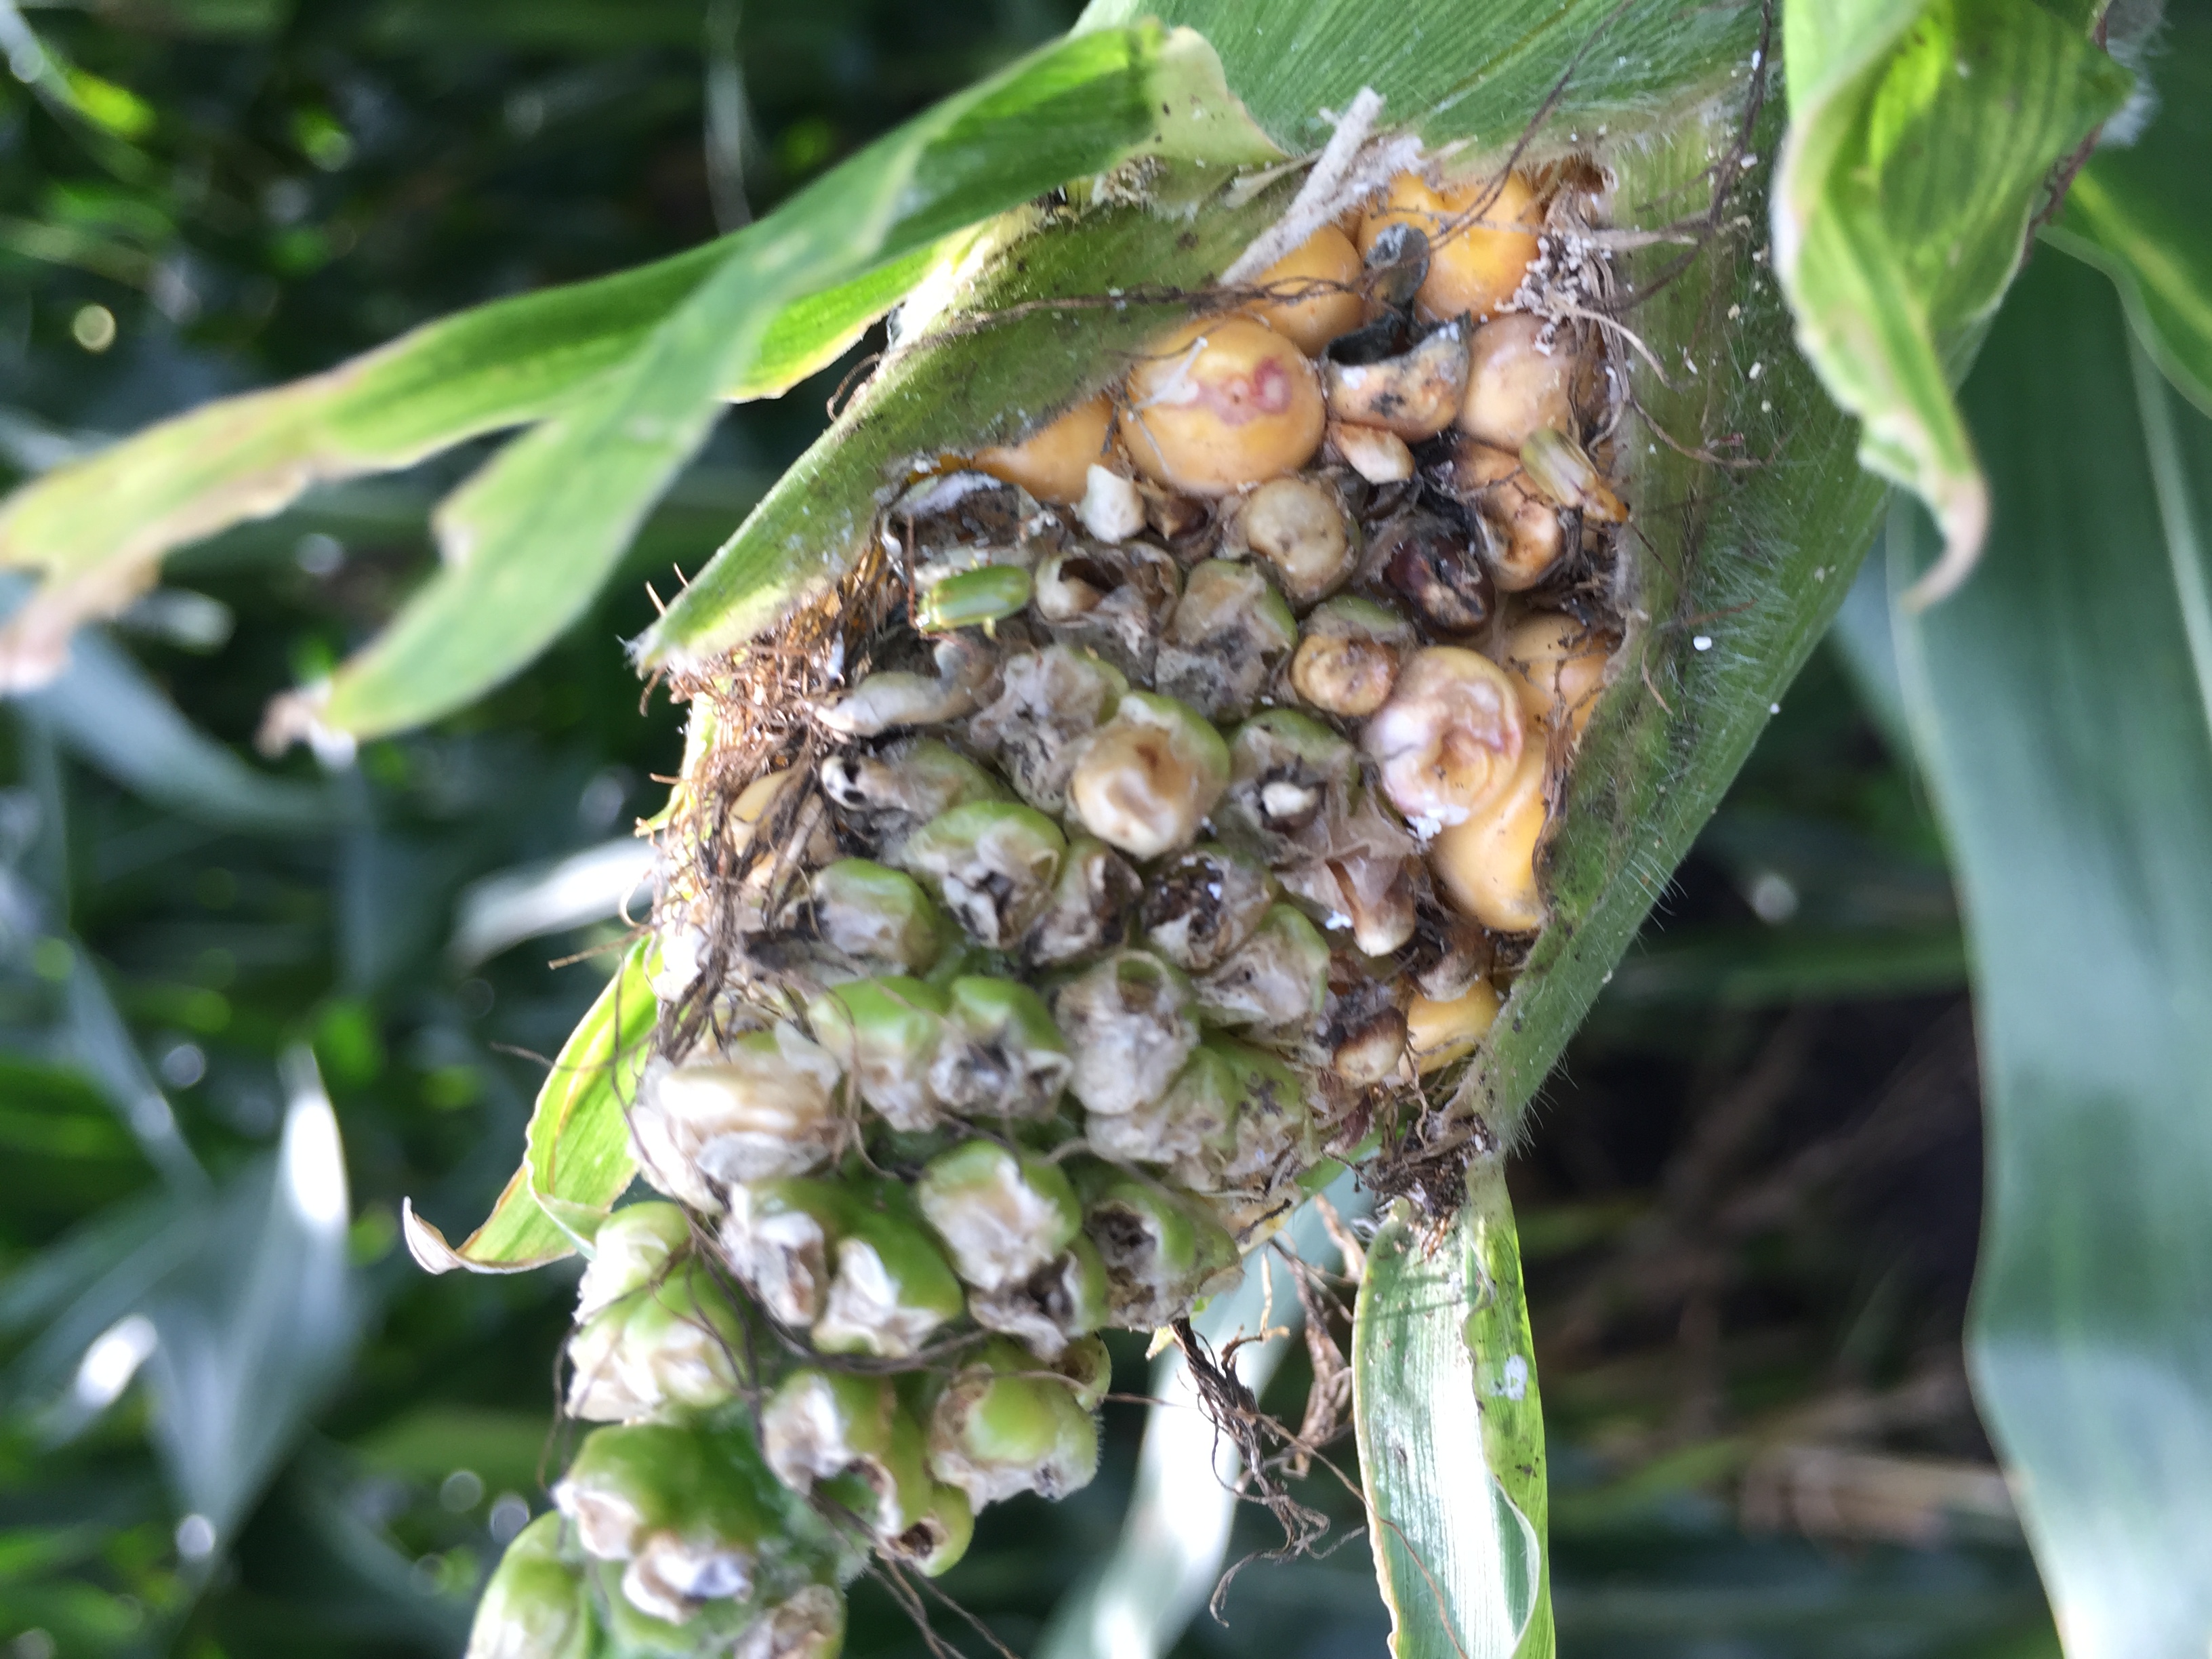 infected ear of corn with corn root worm beetles